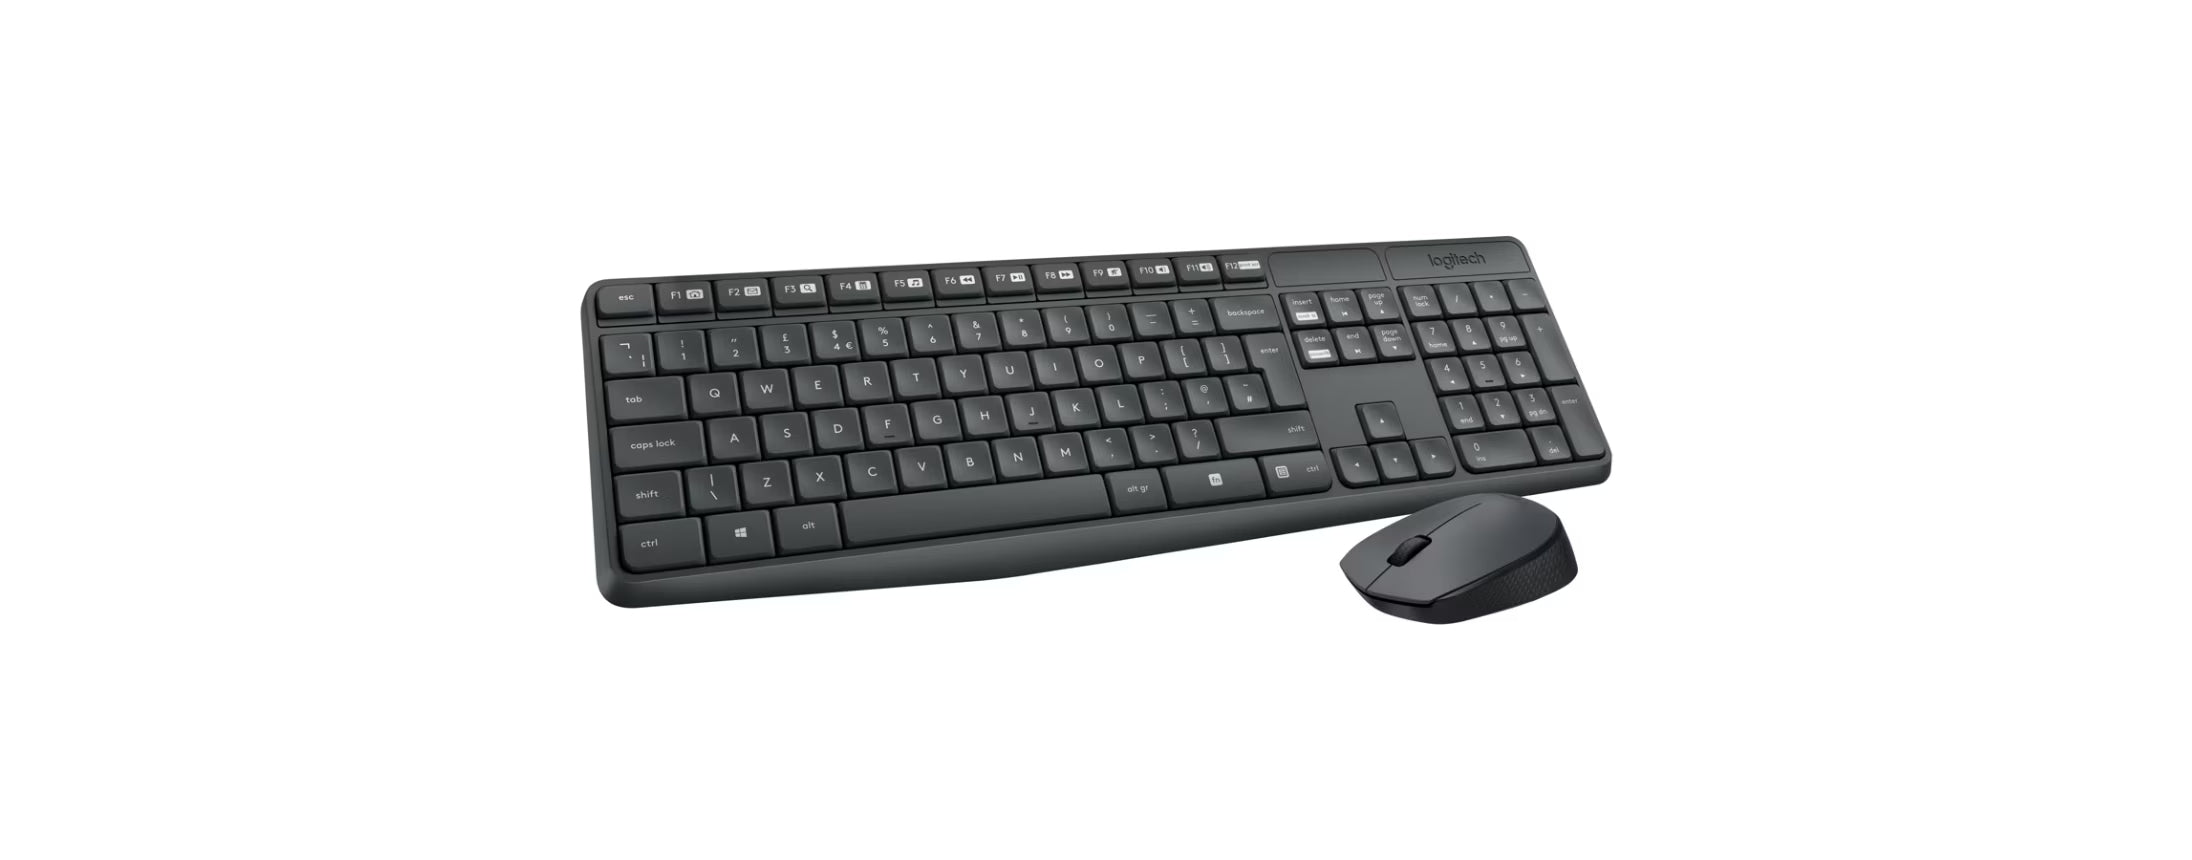 Logitech MK235 - keyboard and mouse set - French Canadian